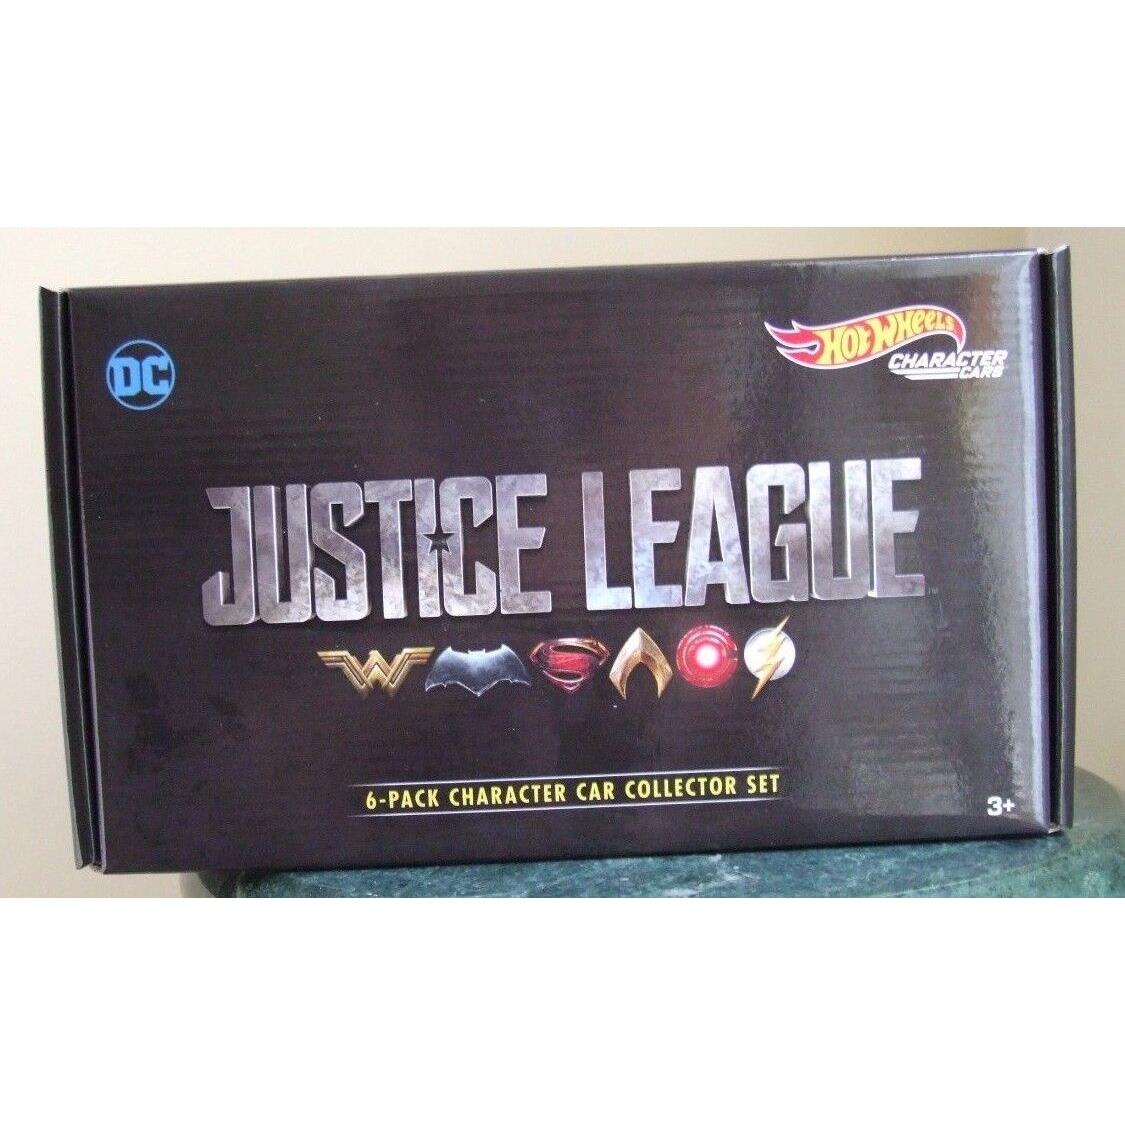 Justice League Hot Wheels 6-Pack Character Car Collector Set - Tru Exclusive